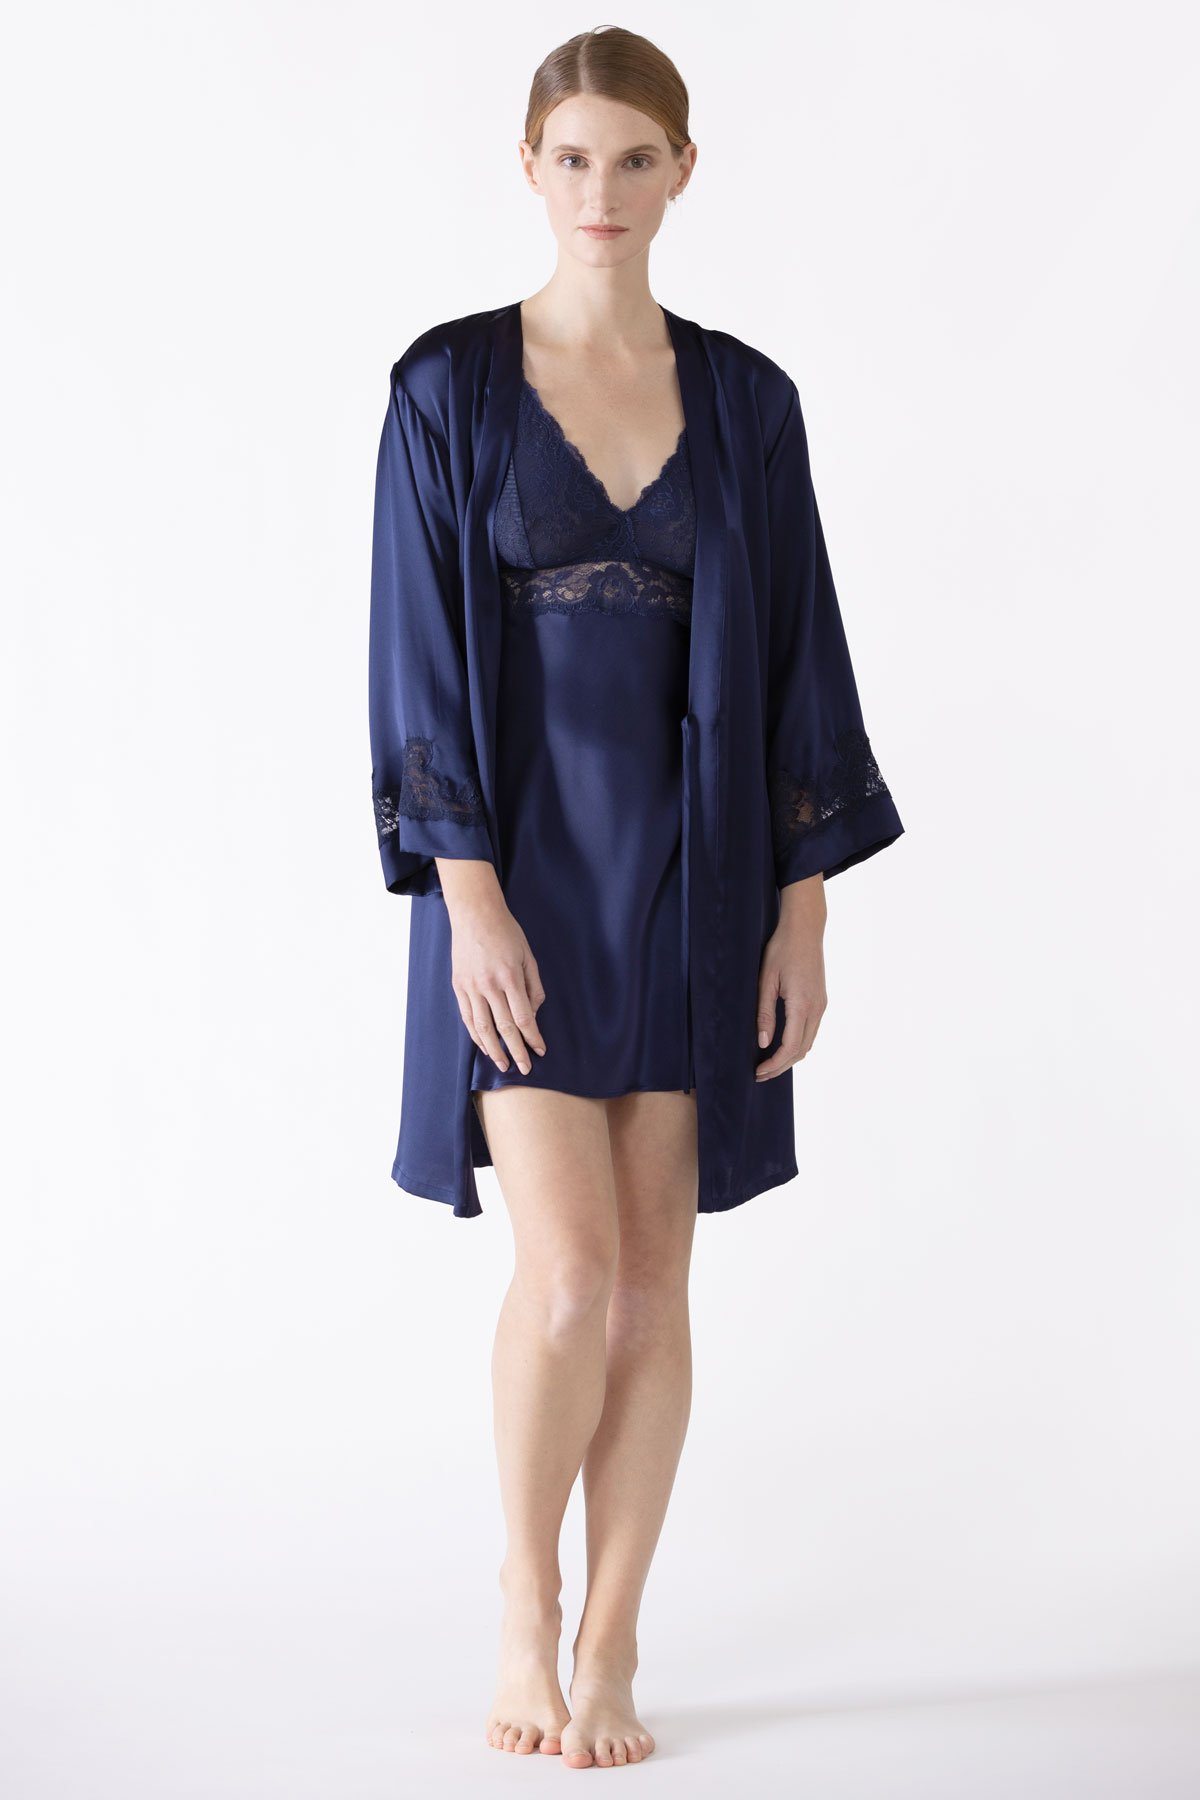 Wholesale Short Viscose & Lace Nightie with Bust Support in Marine